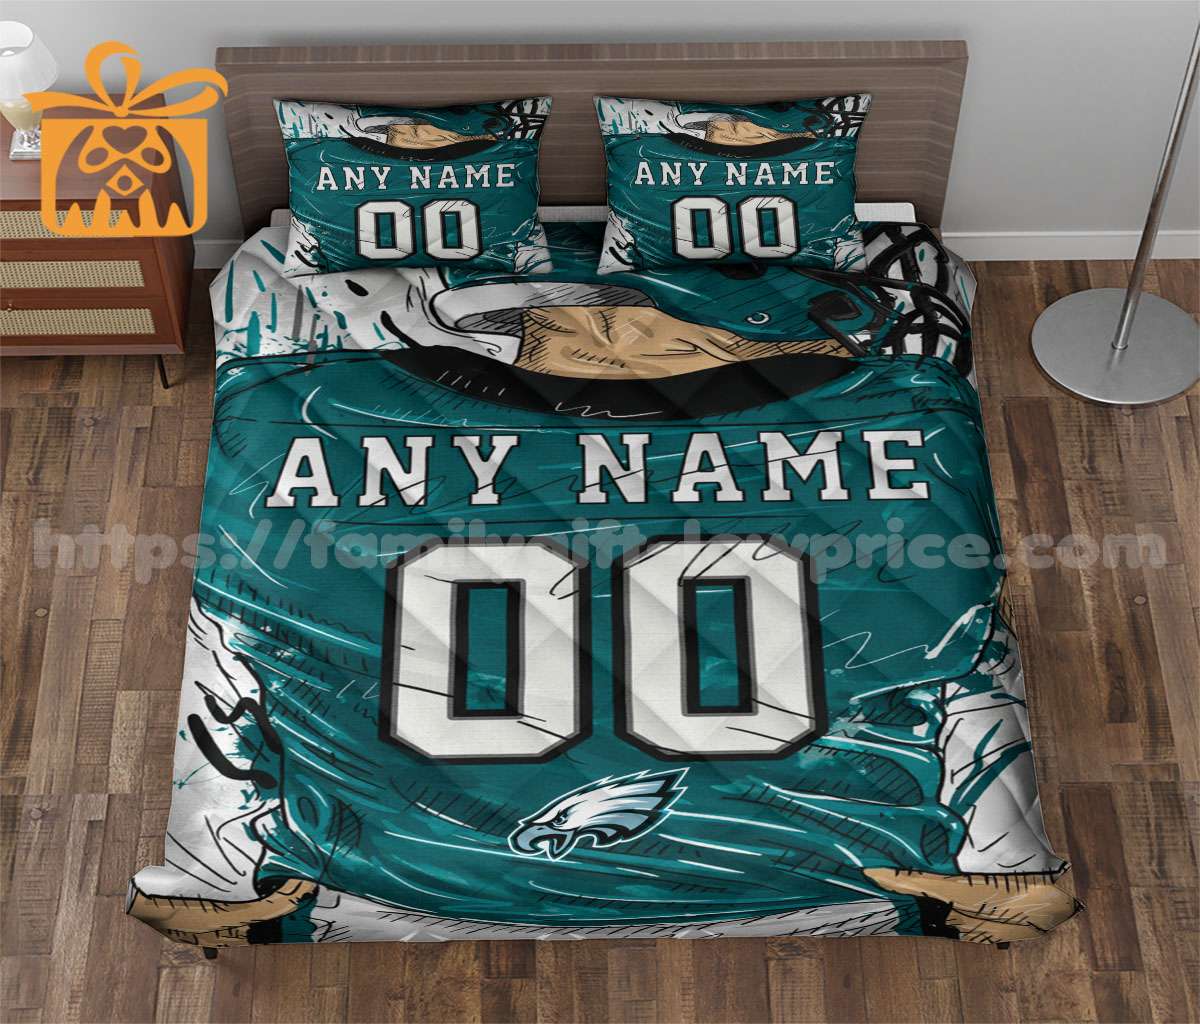 Philadelphia Eagles Custom Jersey Quilt Bedding Sets, Philadelphia Eagles Gifts, Personalized NFL Jerseys with Your Name & Number